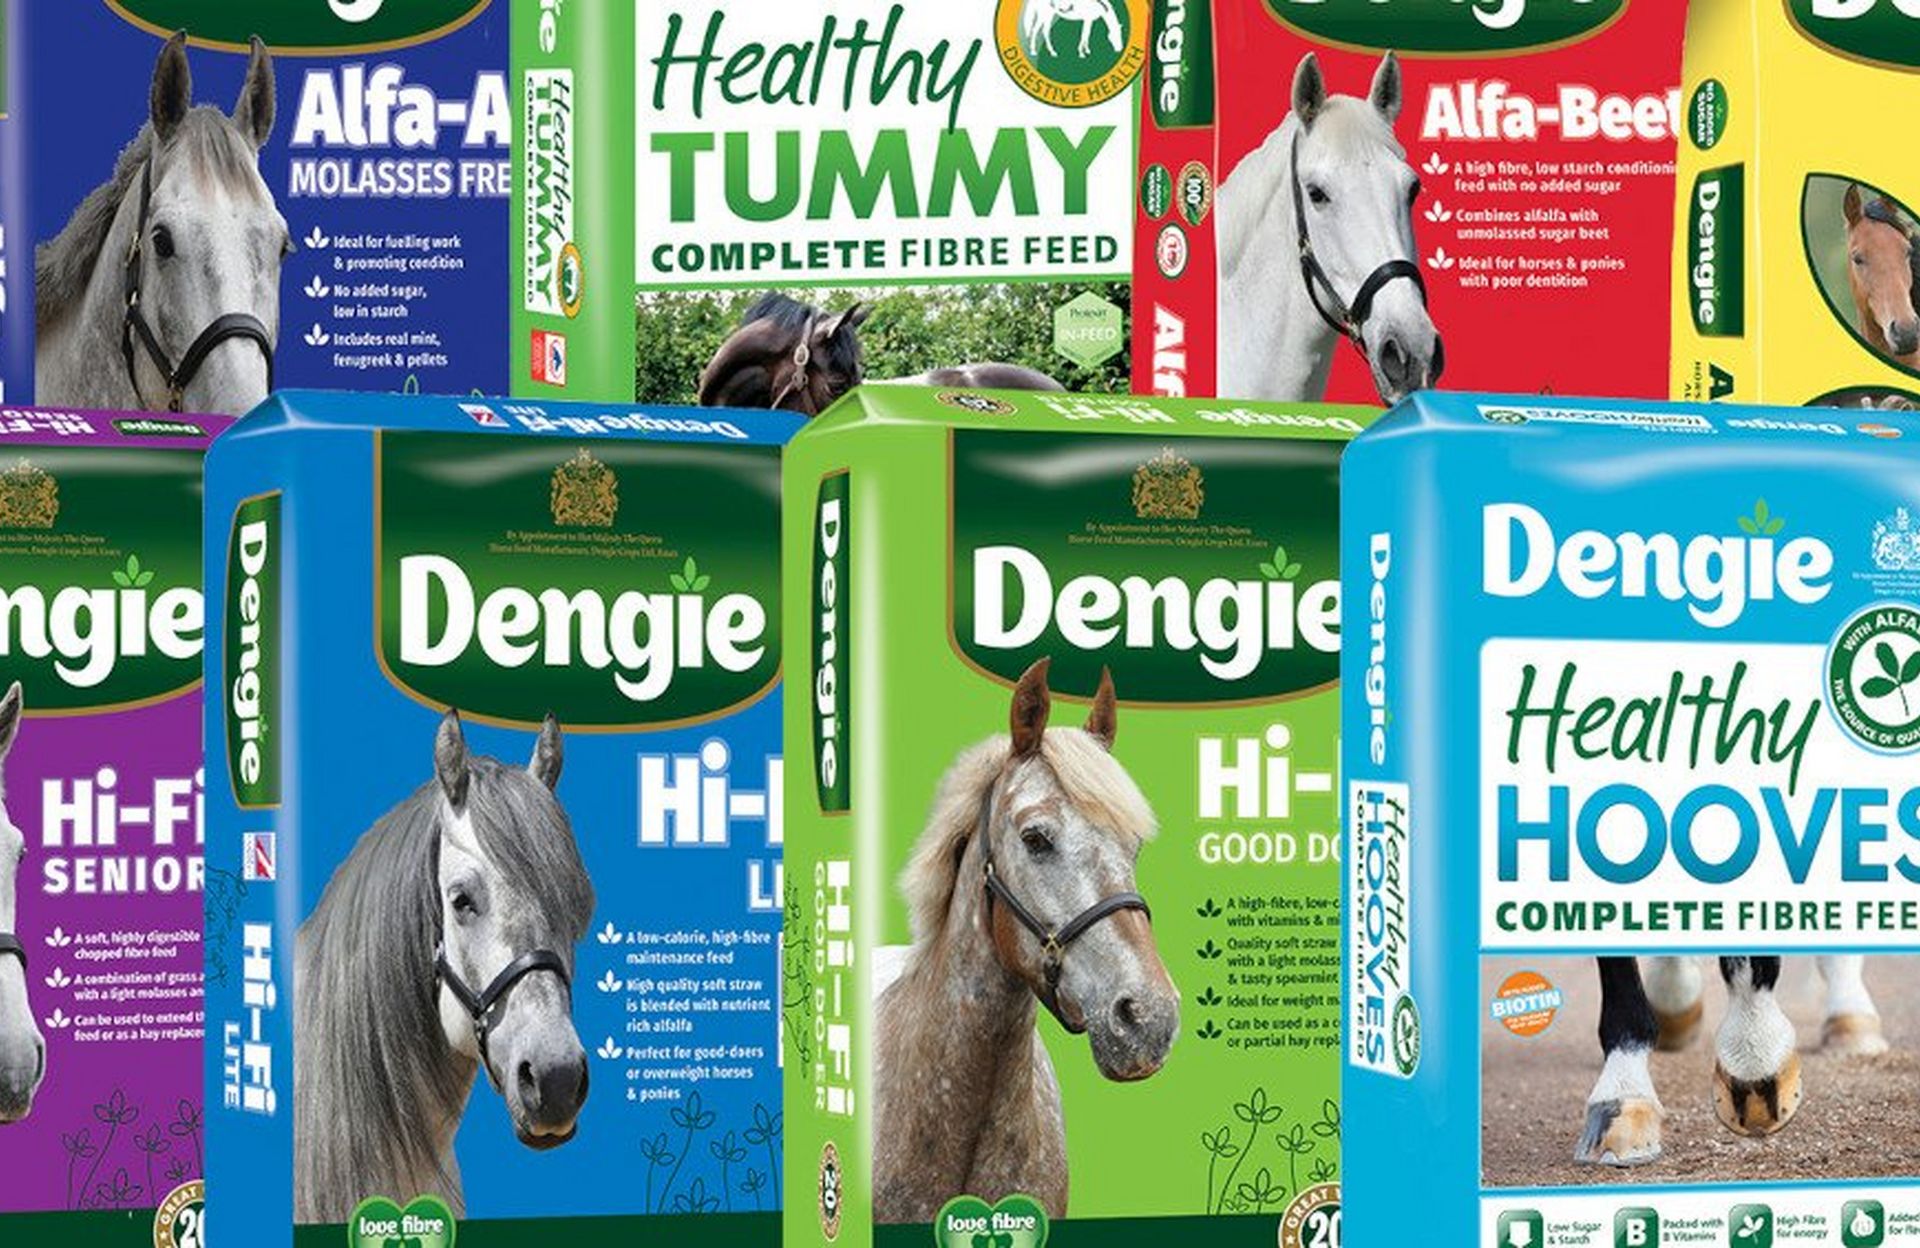 What Types Of Straw Can Be Fed to Horses - Dengie